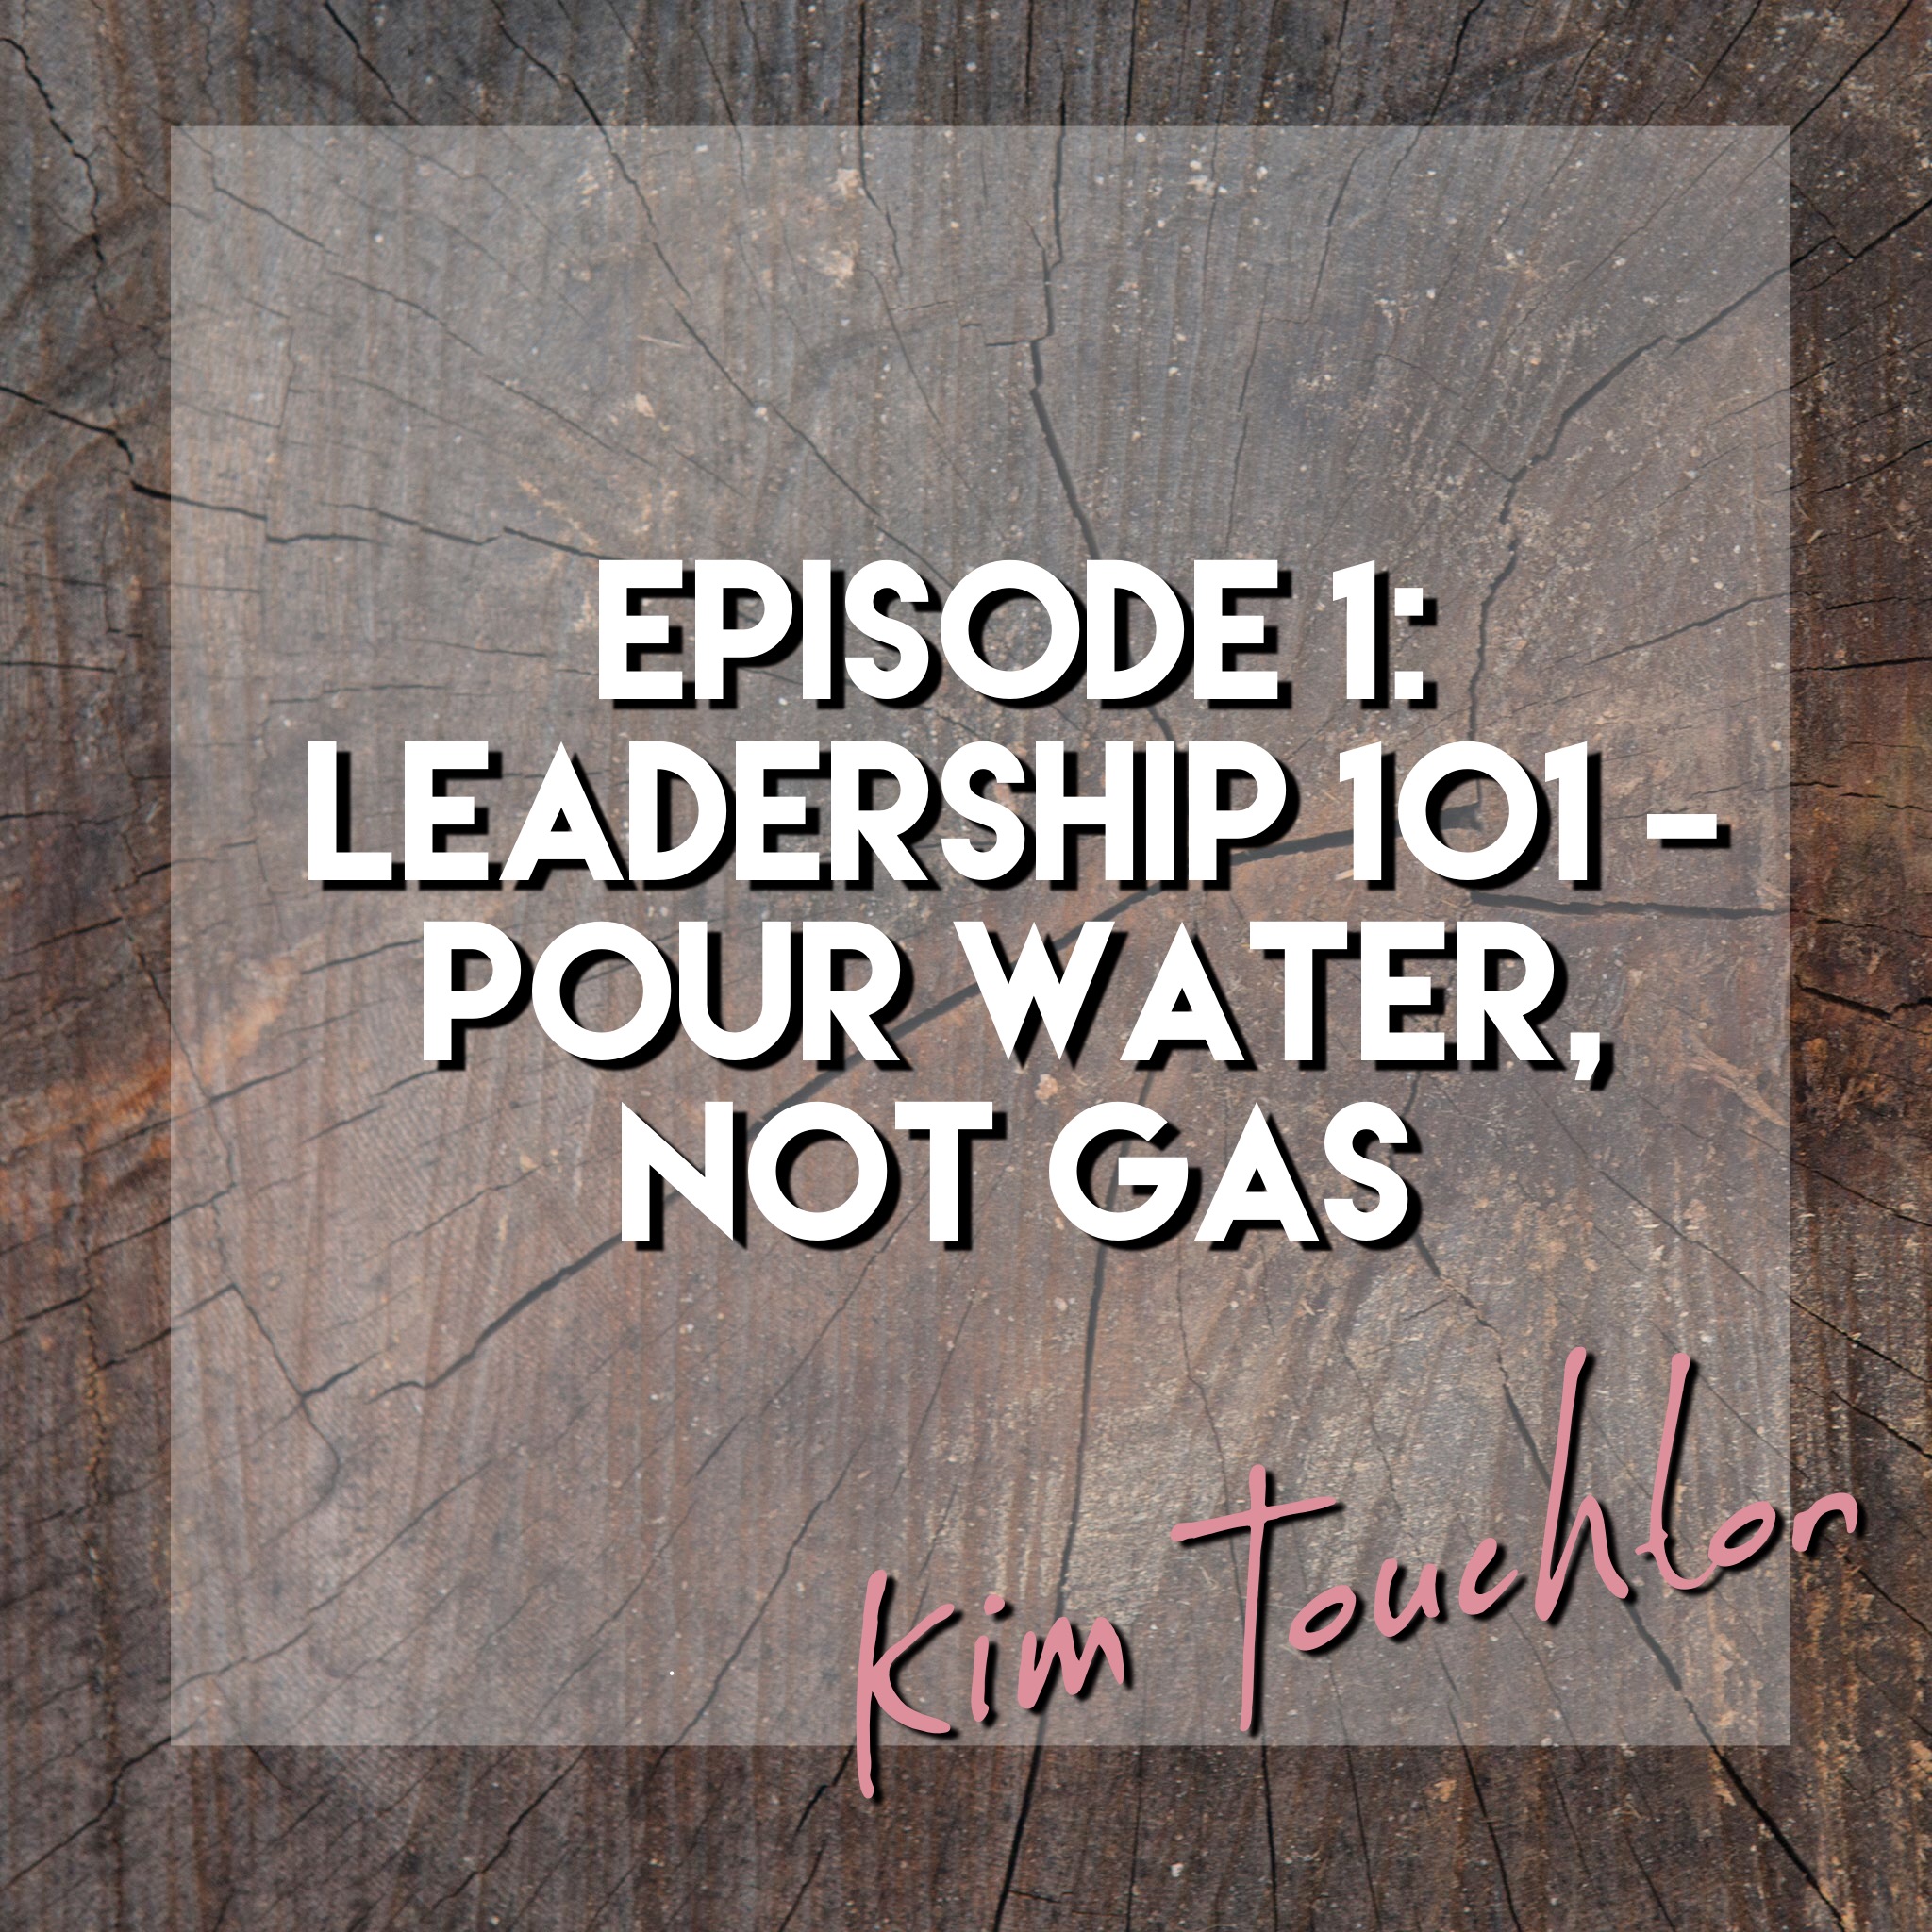 Episode 1: Leadership 101 - Pour water, not gas